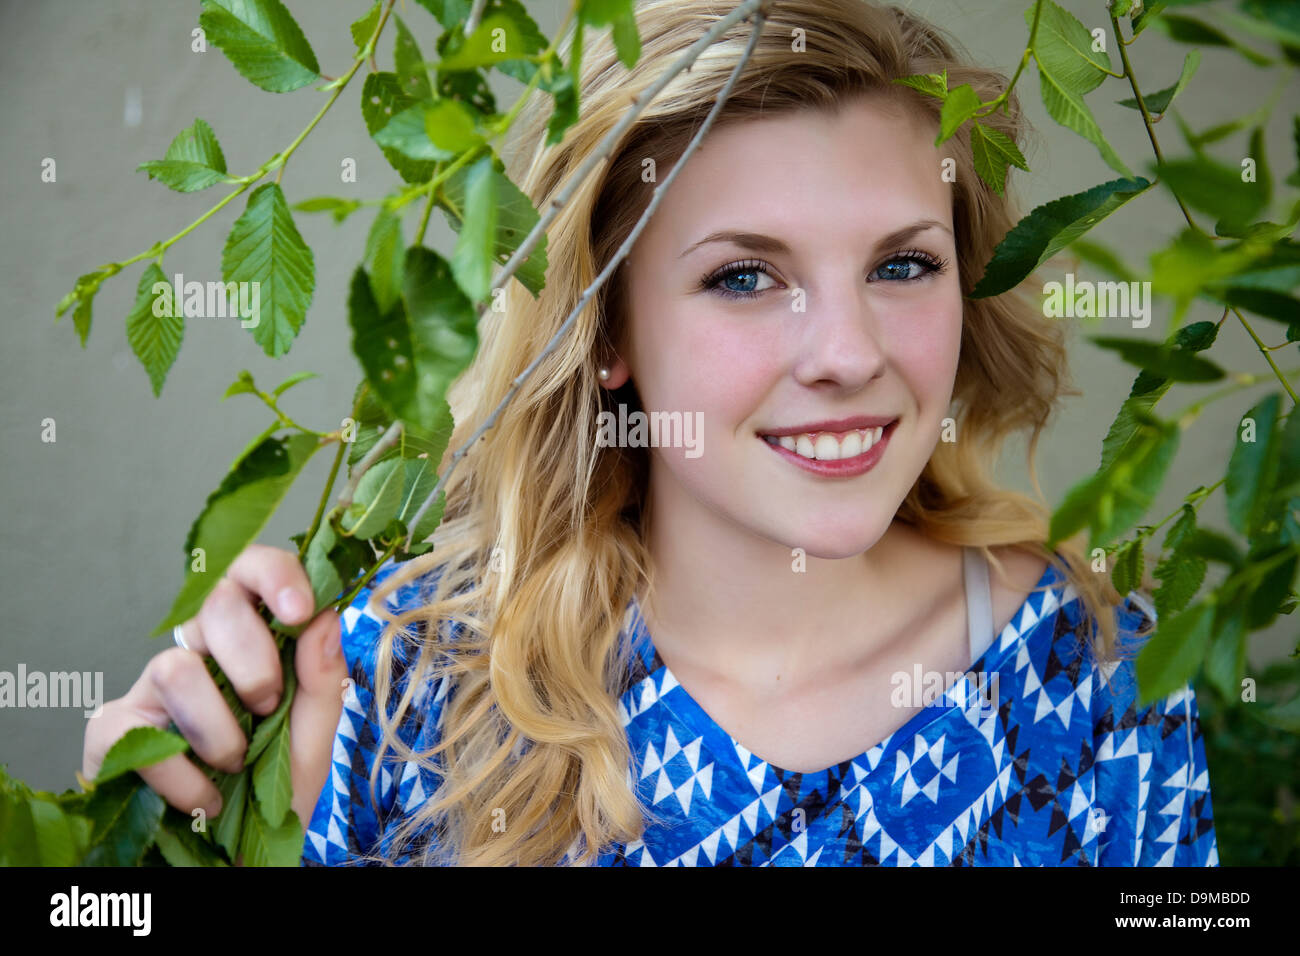 Outdoor photo of young, pretty, blond girl in foliage Stock Photo